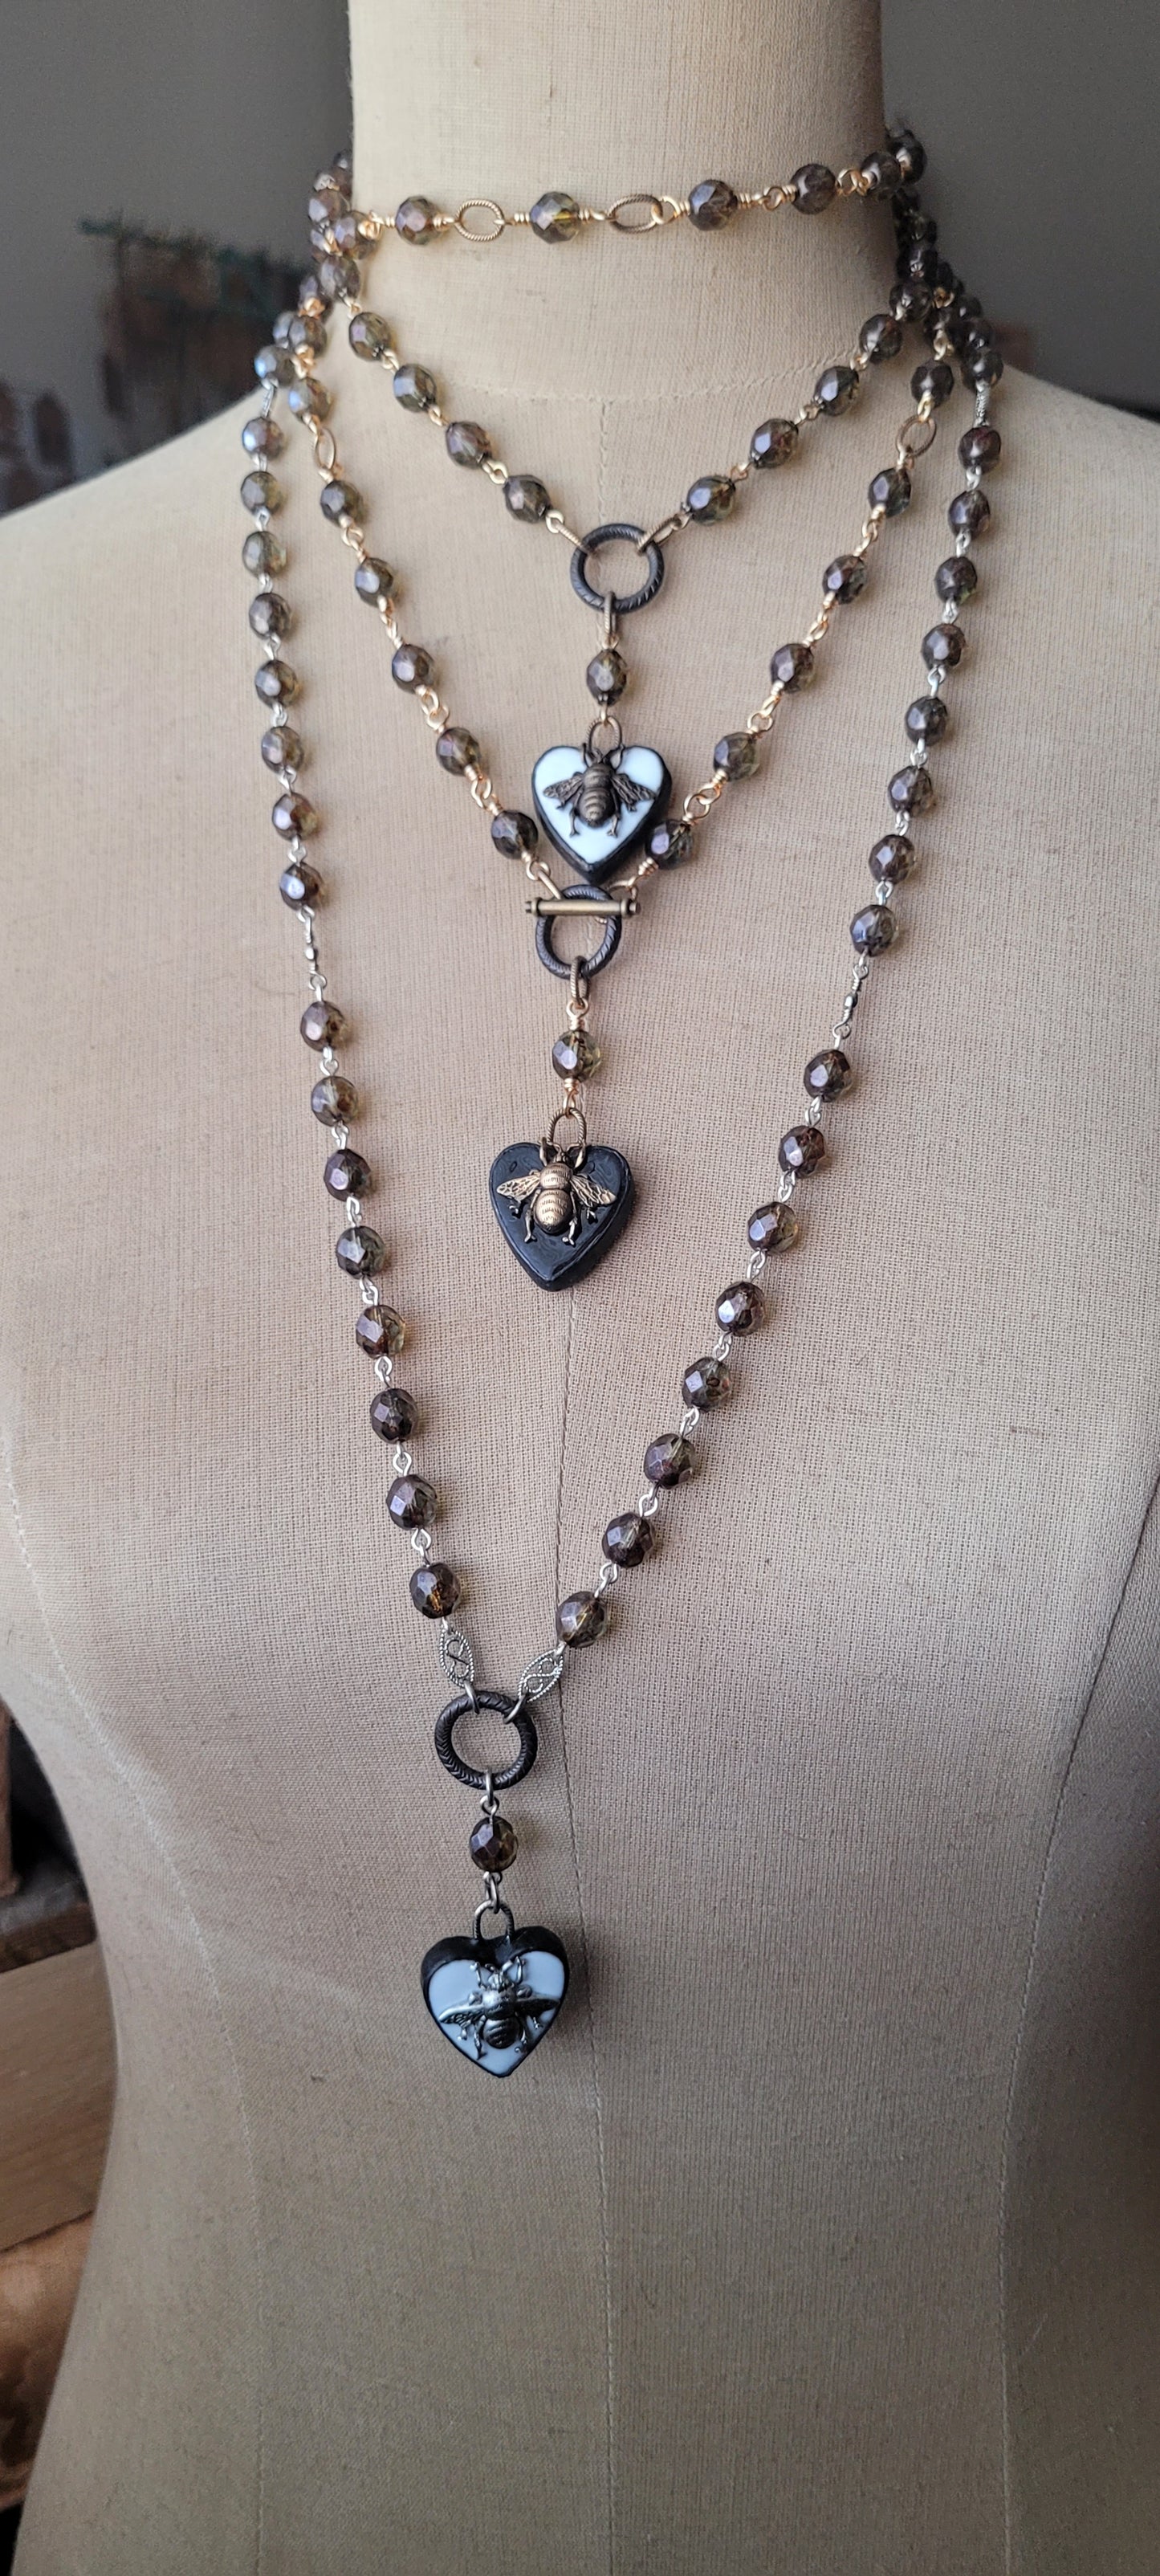 Black Ceramic Queen Bee Heart necklace,  green pine Picasso Czech crystal beads, rosary style bead chain necklace